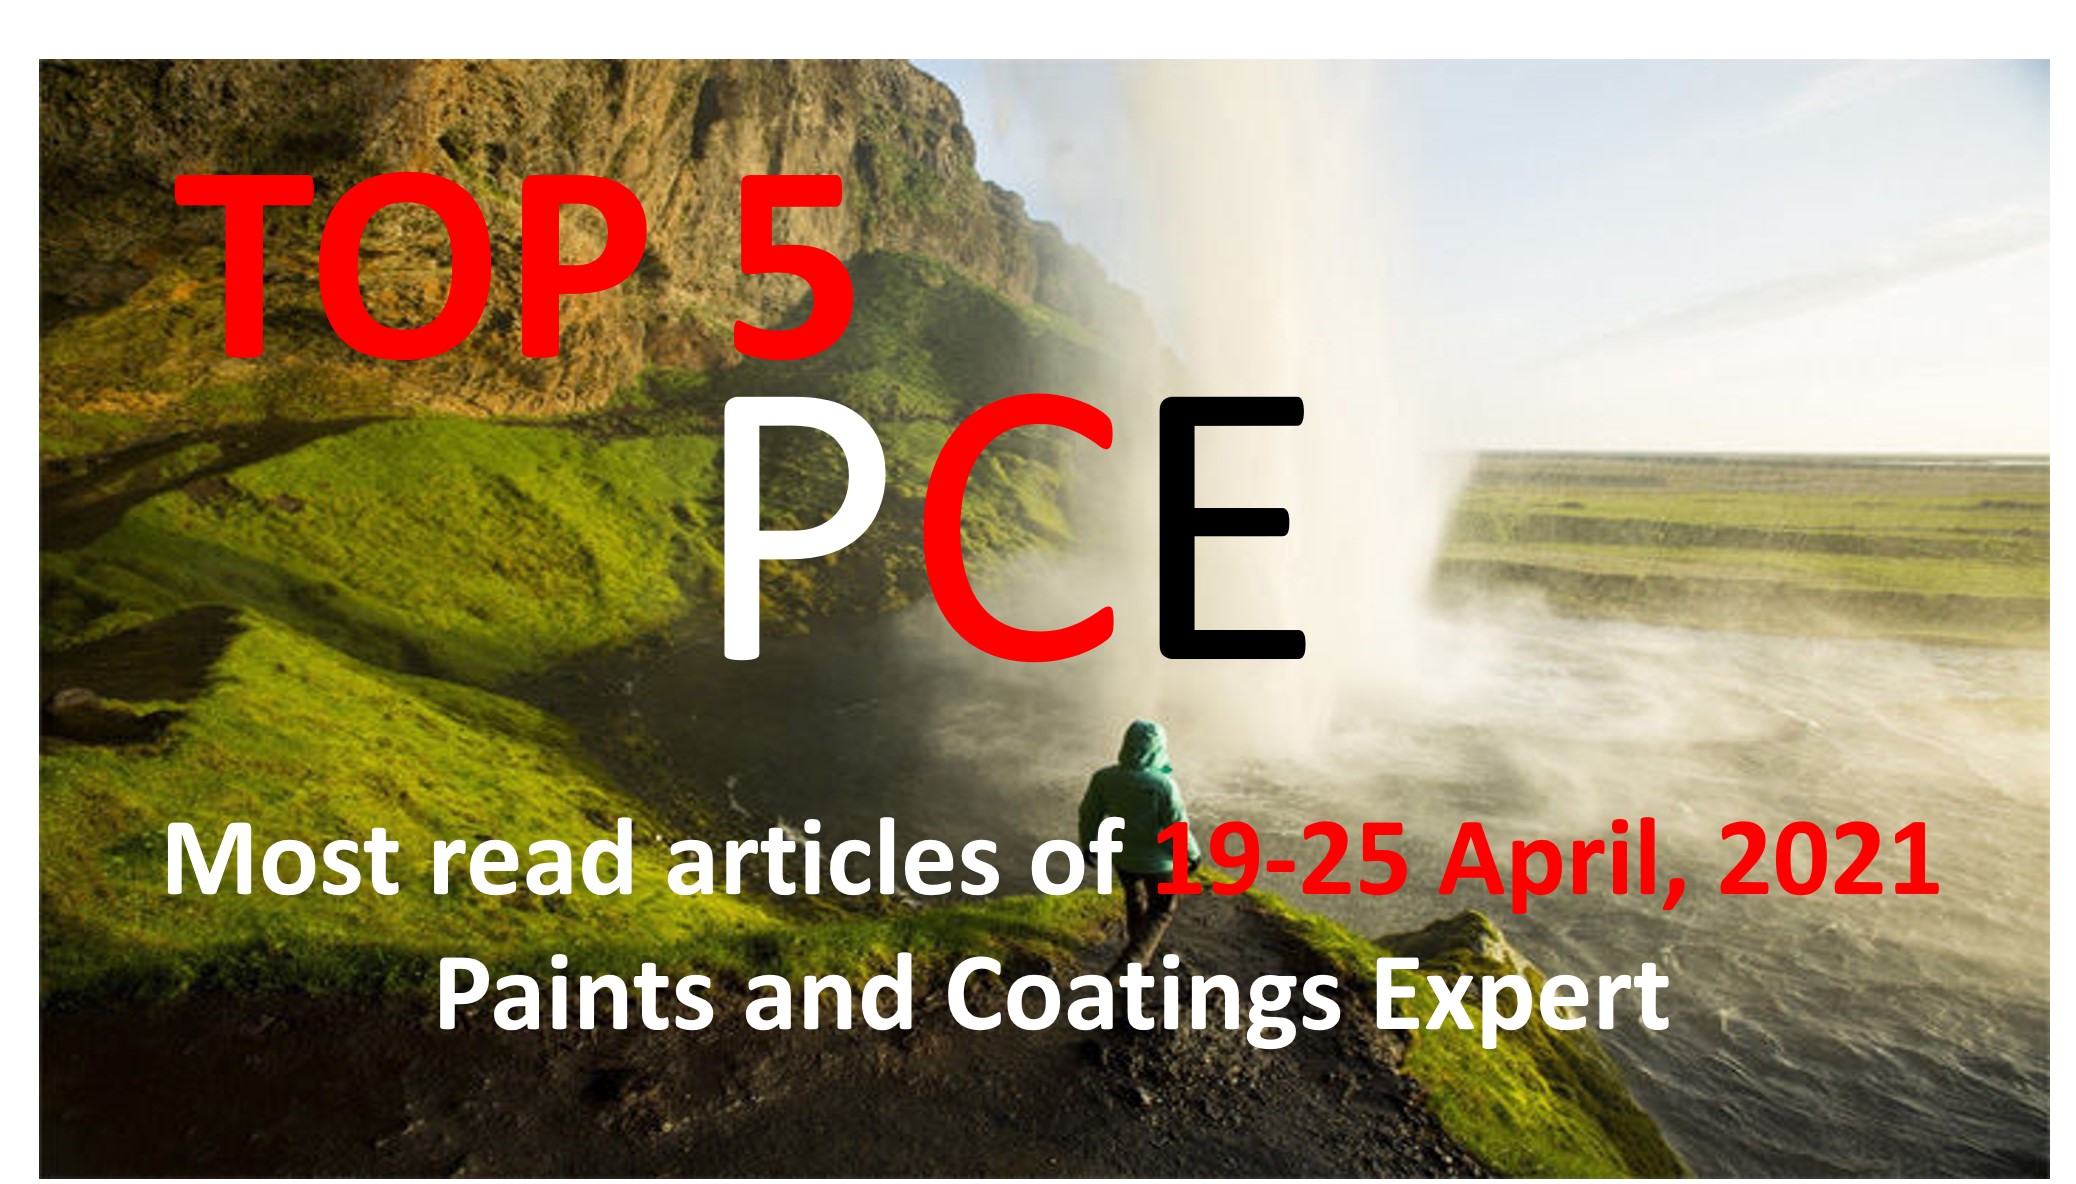 Top 5 Most read articles from 19-25 April, 2021 on Paints and Coatings Expert